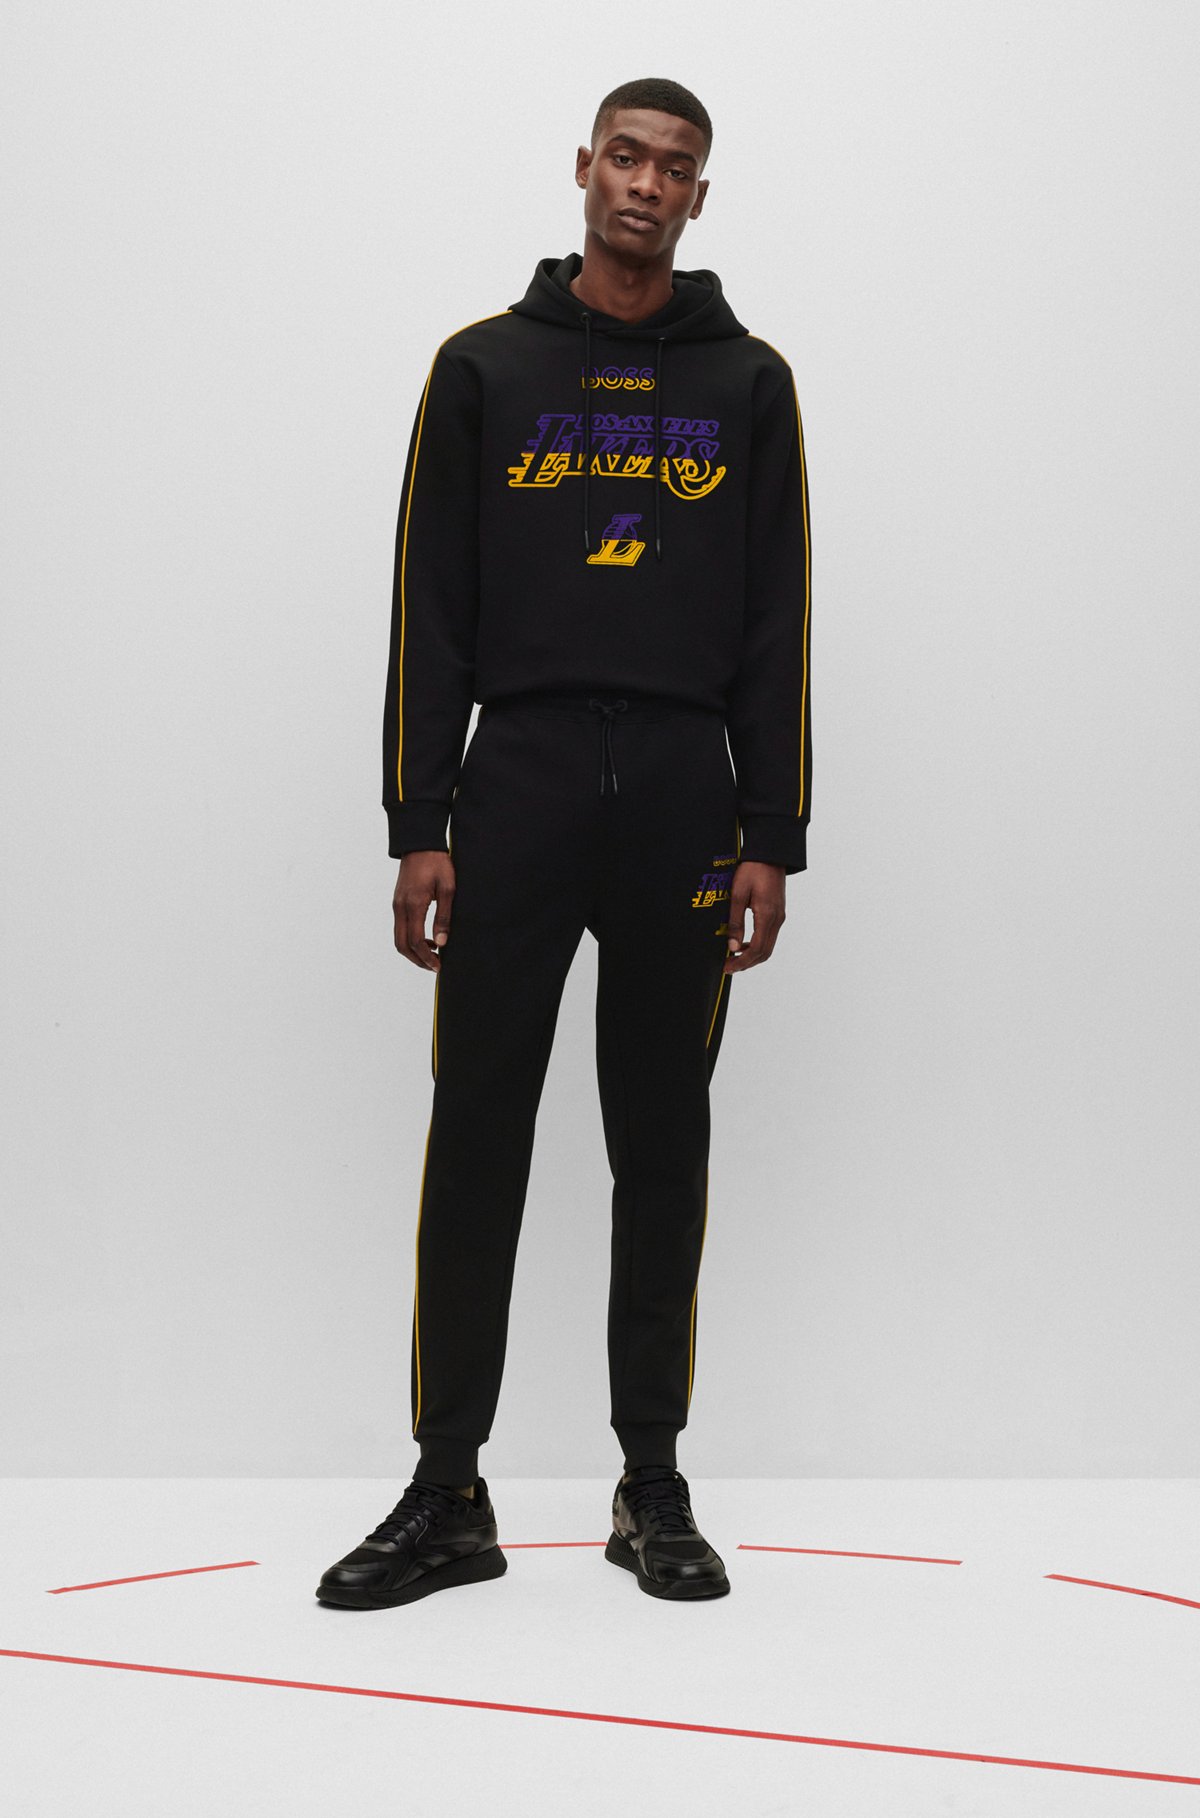 lakers track suit